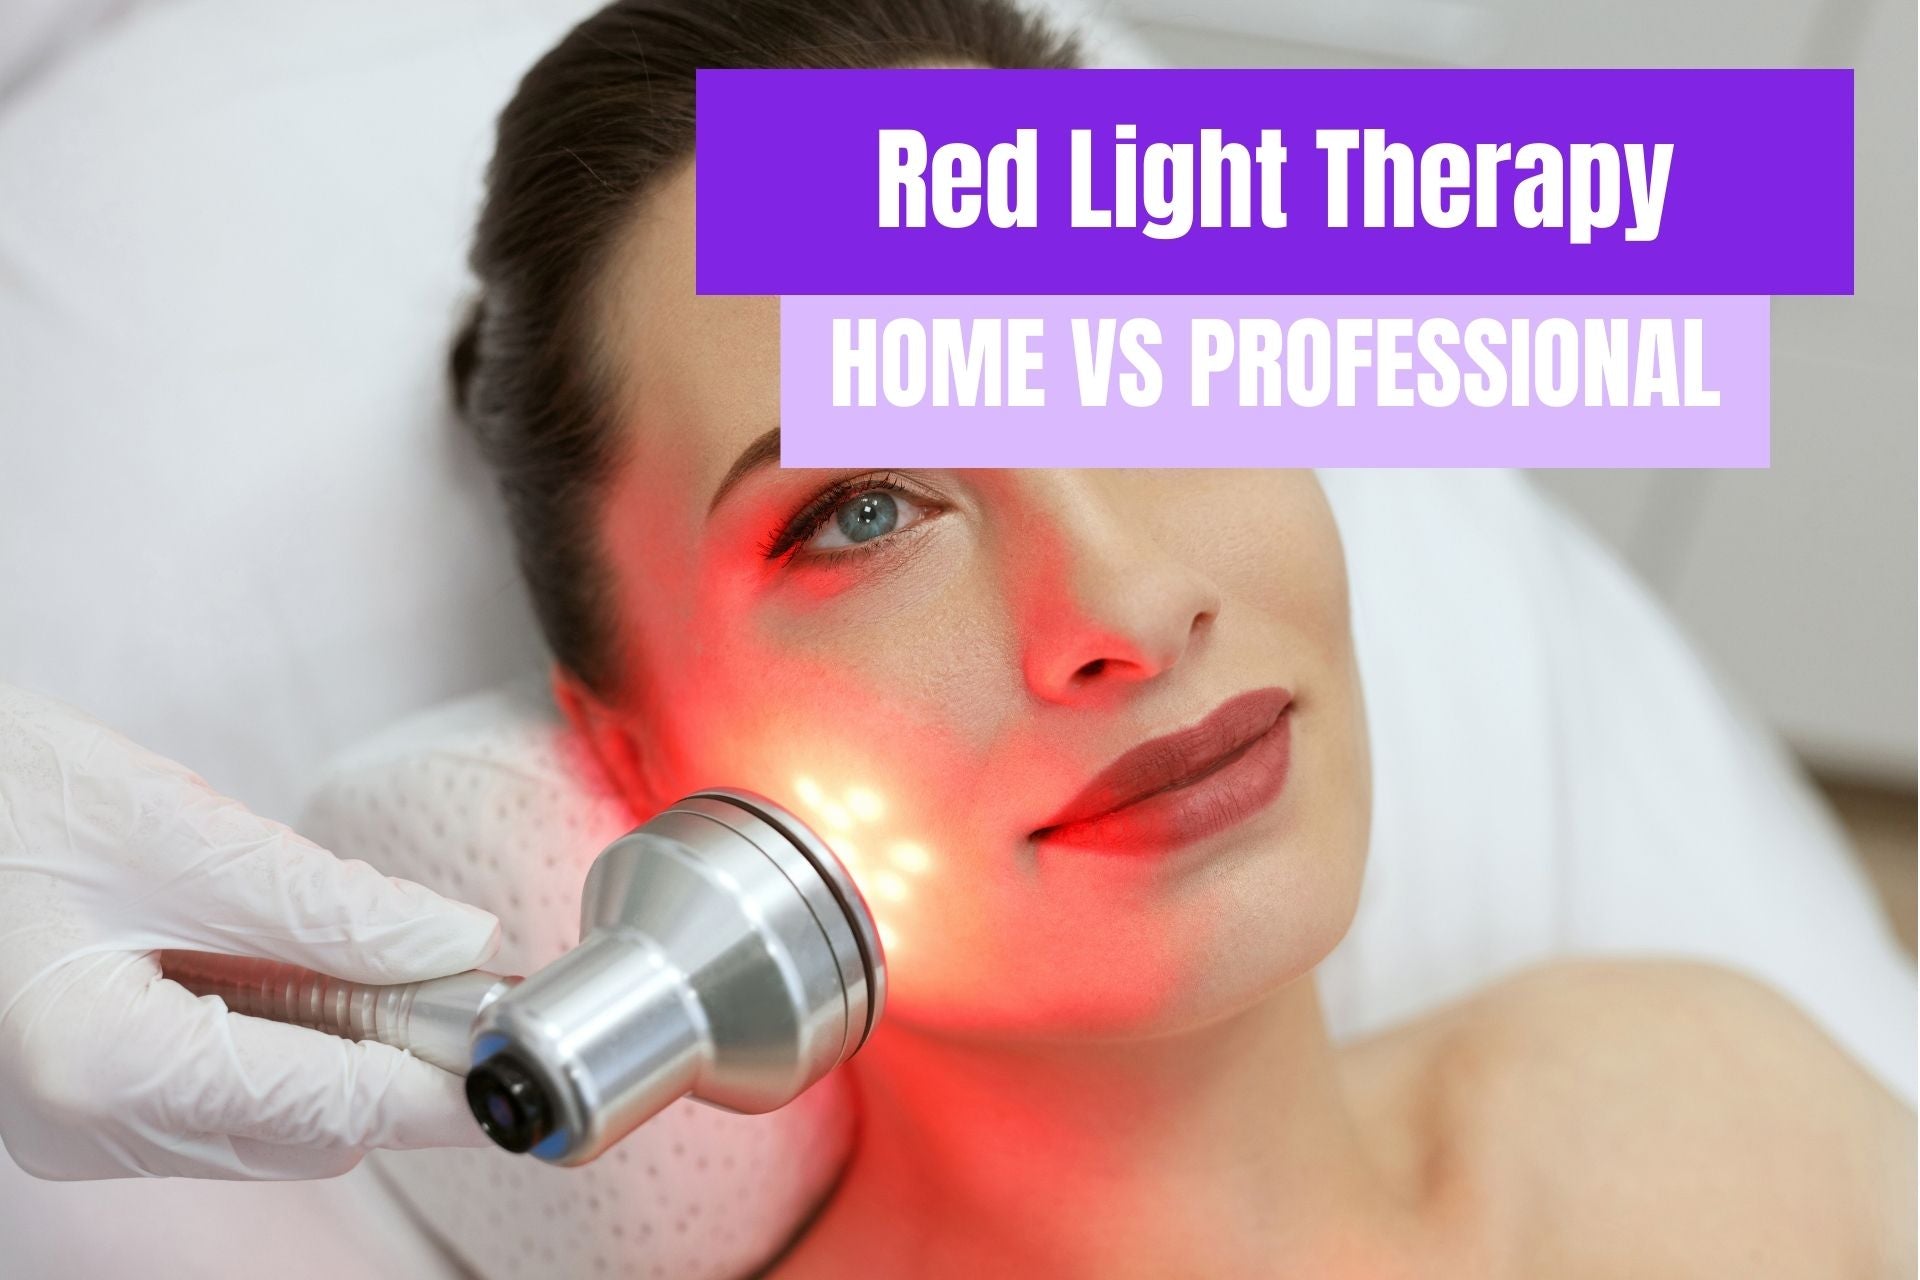 Red Light Therapy: At Home vs Professional